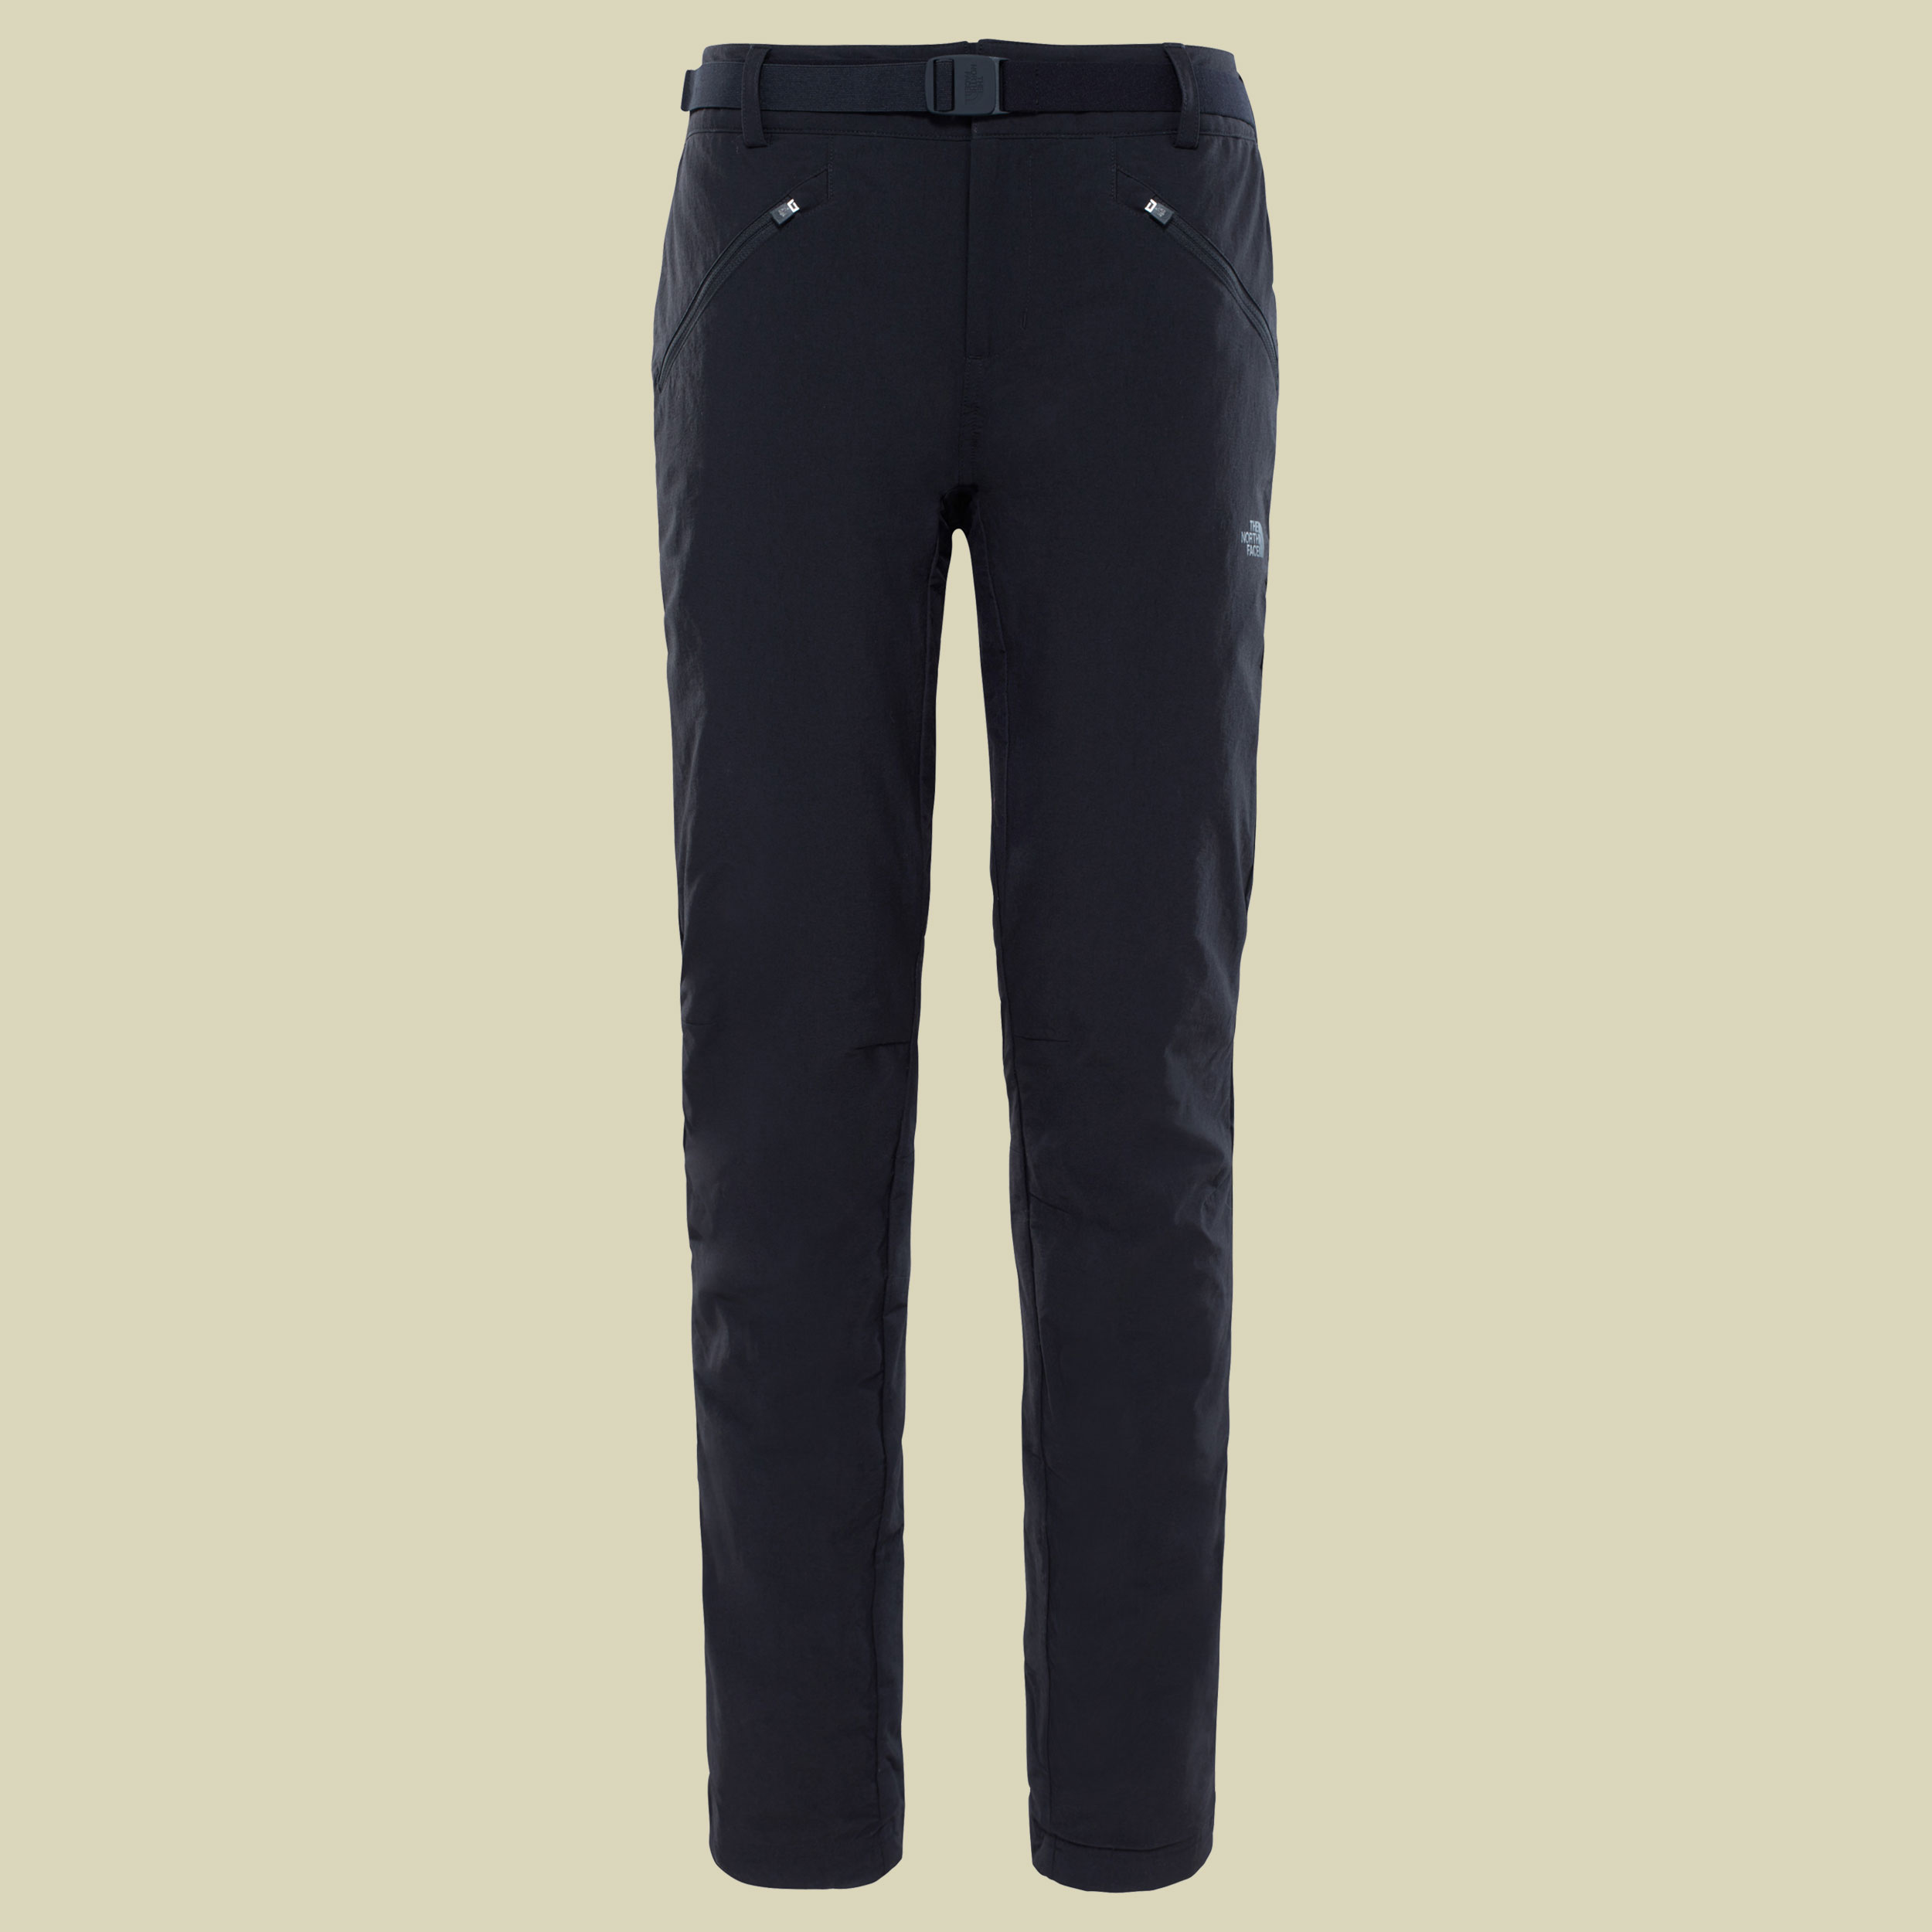 Exploration Insulated Pant Women Größe 34 Farbe TNF black